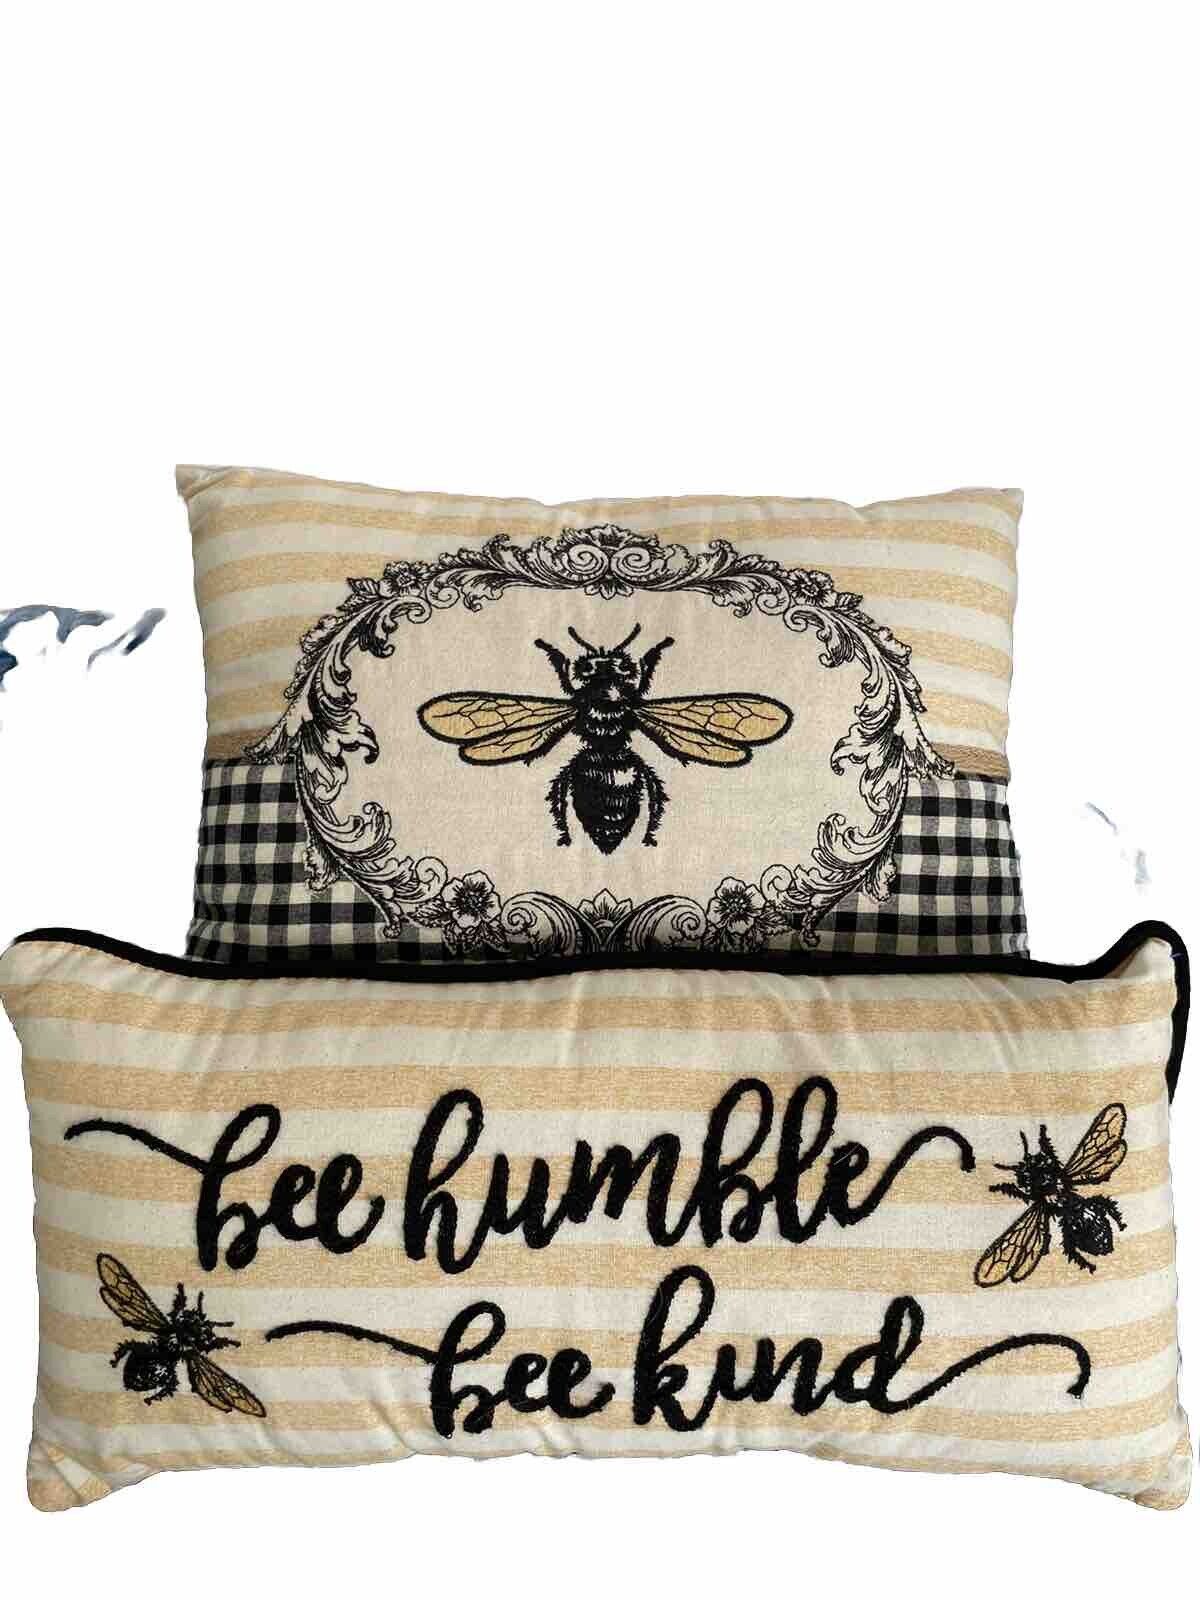 Lot 2 Bumble Bee Fly Throw Pillow 9x19 11x15 Mackenzie Childs Style Bee Kind